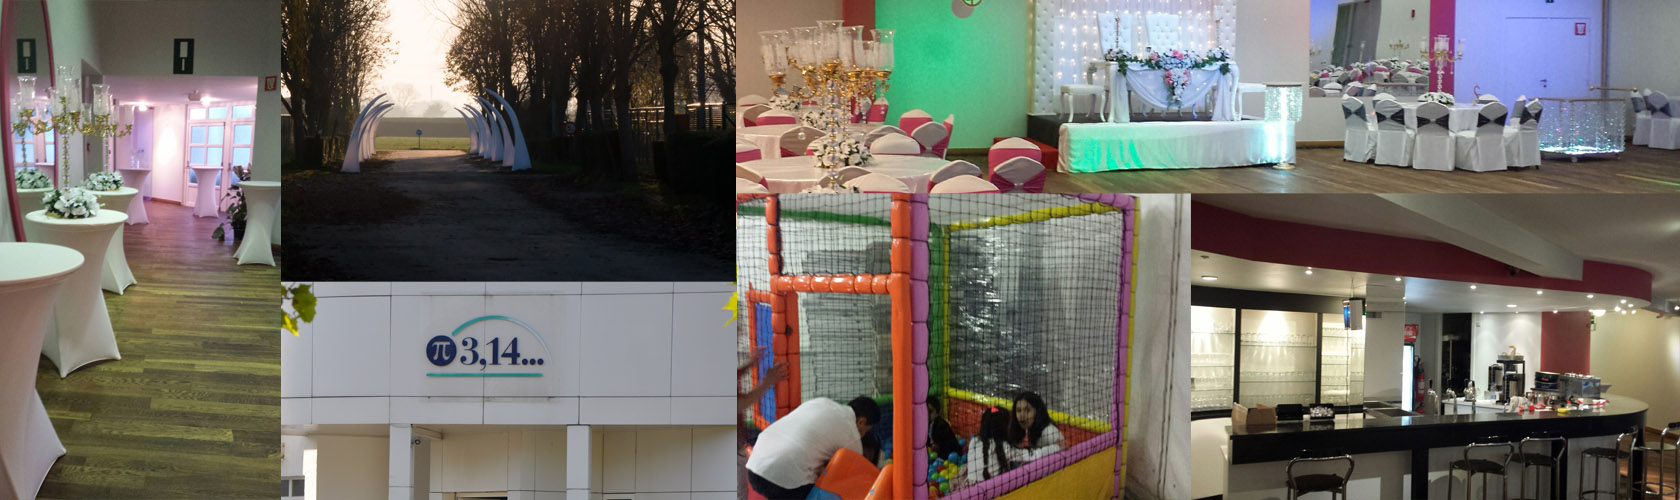 With play area for your children.